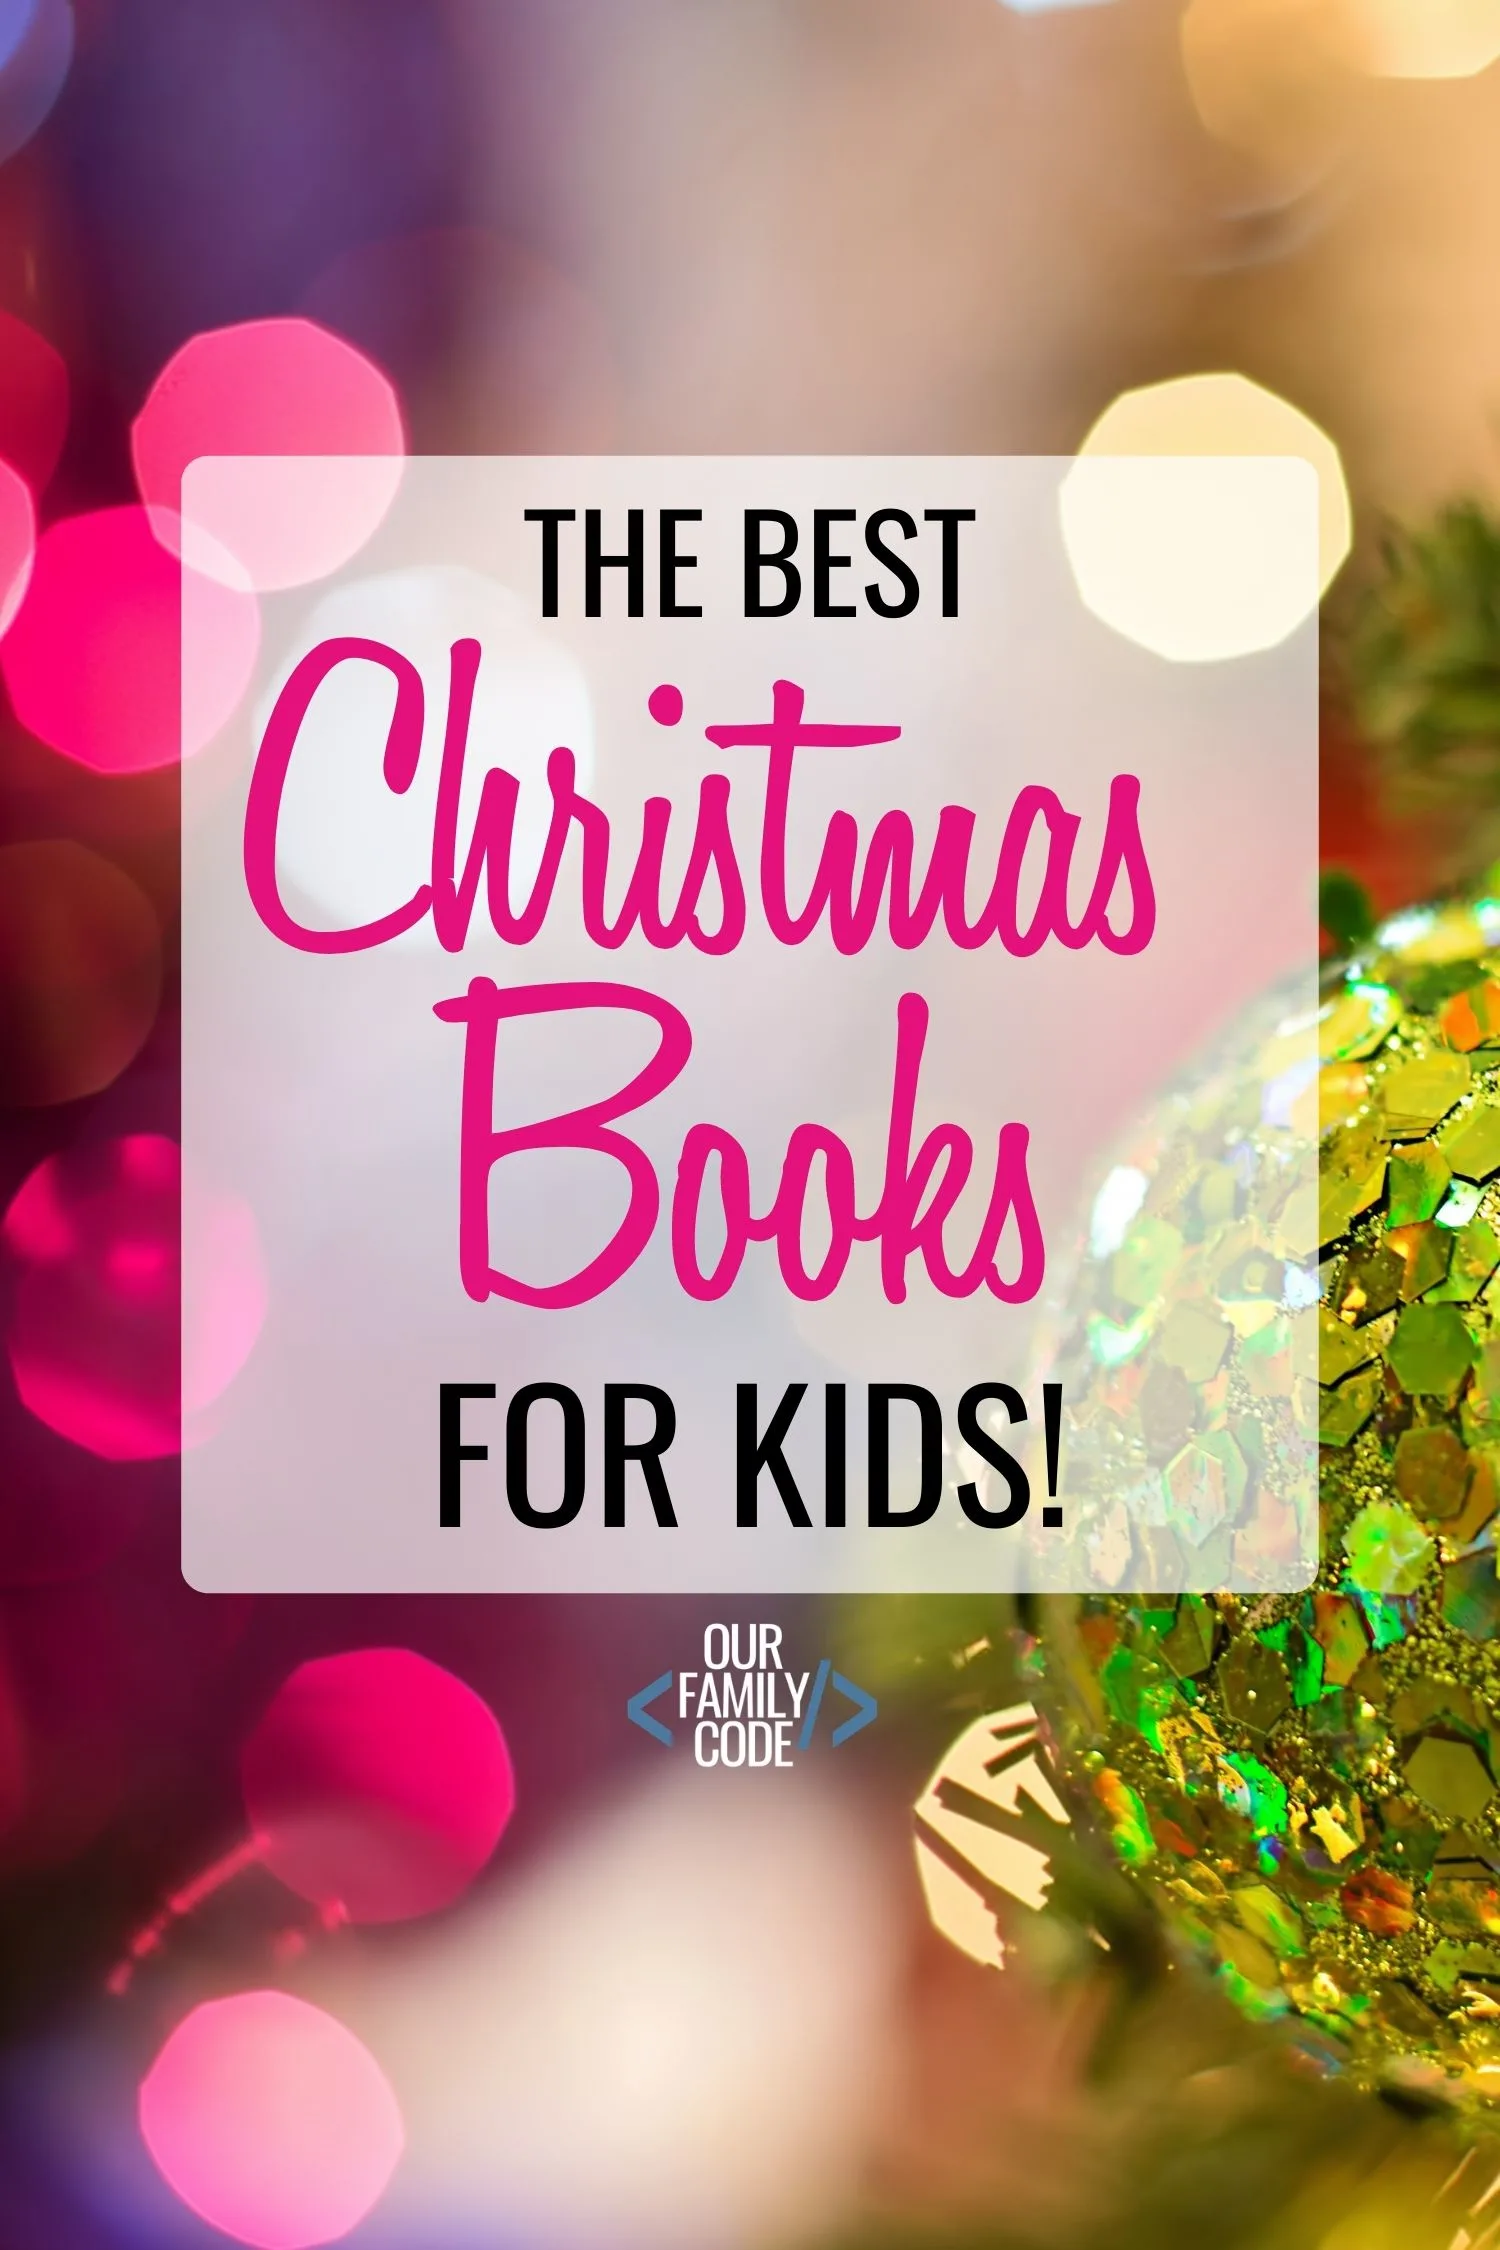 Check out our list of the best Christmas books for kids and start a new holiday tradition this year with some classic stories and some new books too! #Christmastradition #adventcalendar #Christmasbooks 